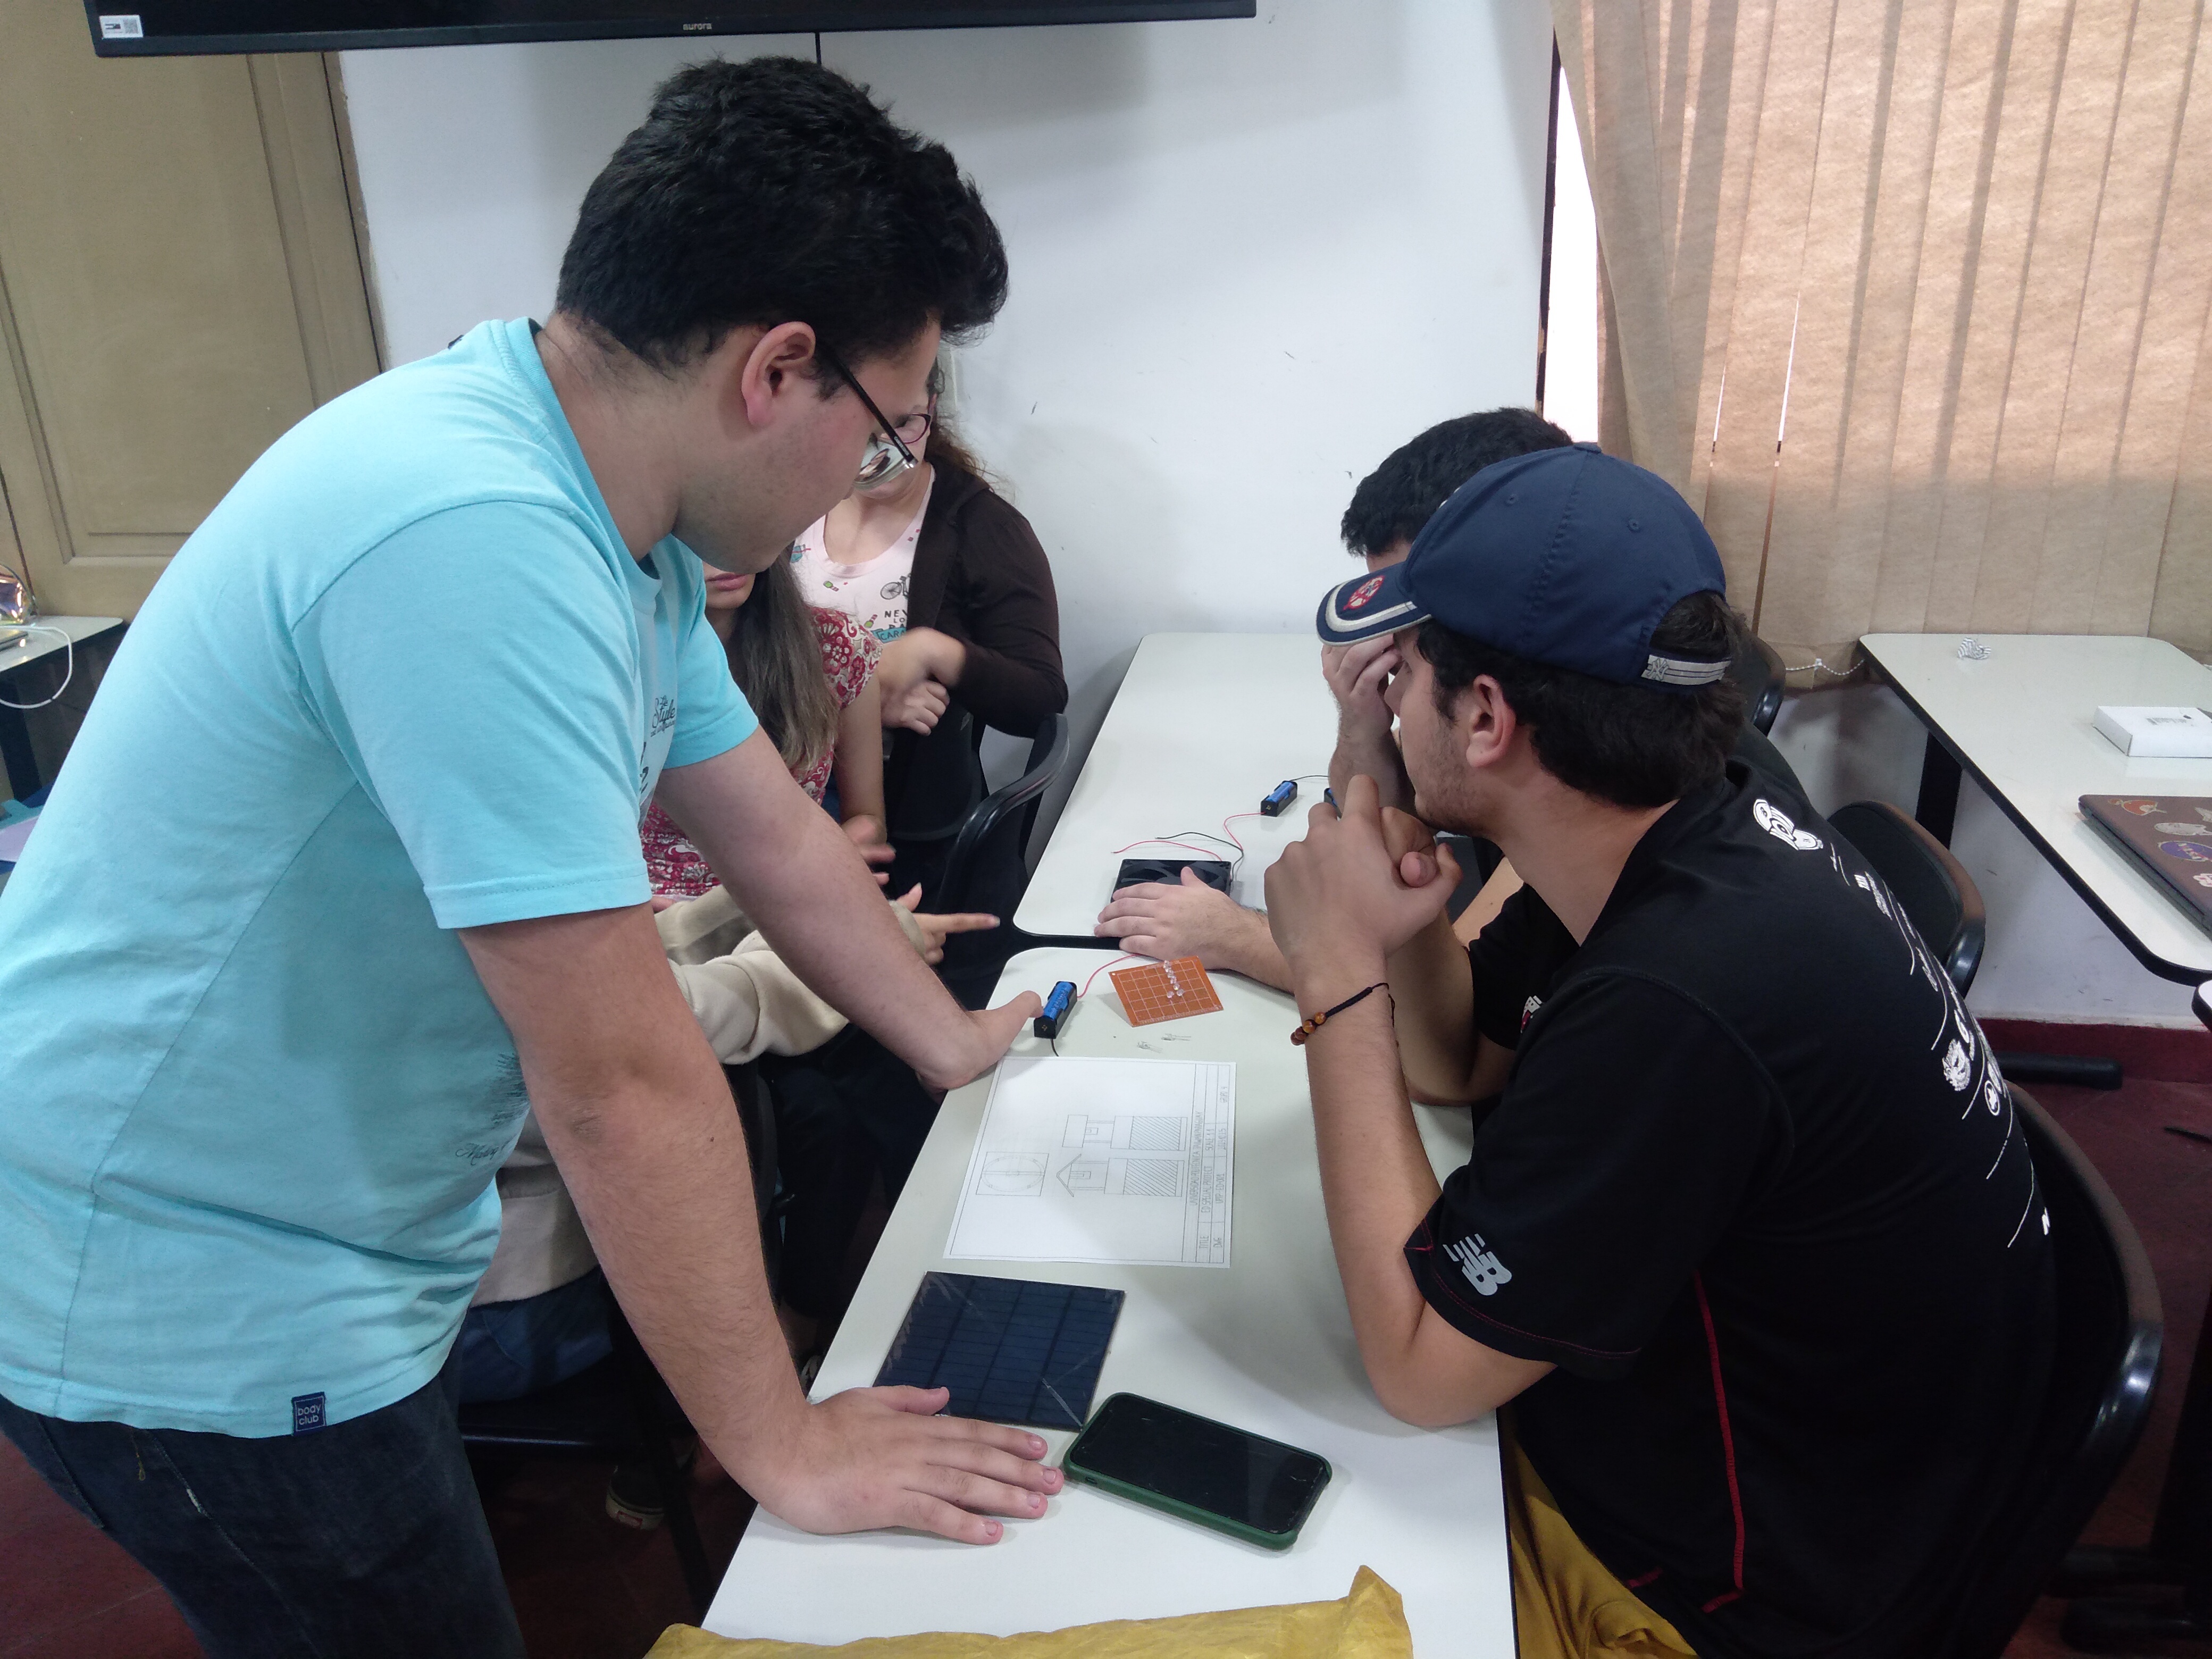 The Taiwan-Paraguay Tech student team is engaging in discussions regarding the design of solar-powered mosquito lamps.